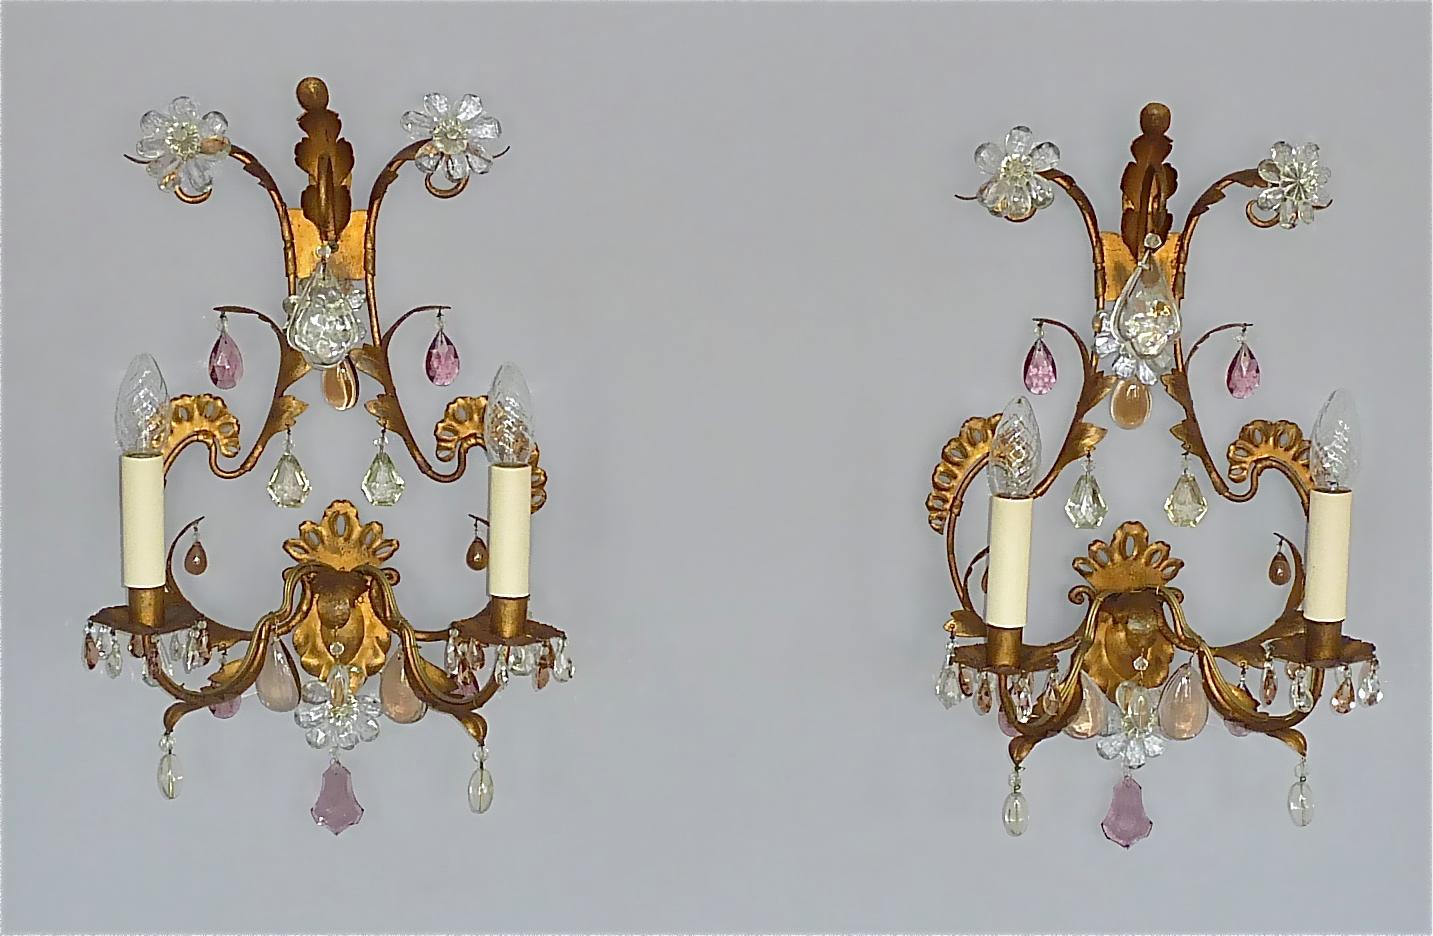 Large refined pair of floral Maison Baguès Style leaf sconces or wall lights, France circa 1950s. They are made of gilt iron / metal combined with beautiful faceted crystal glass in clear, amethyst and light brown color with sparkling glass beads